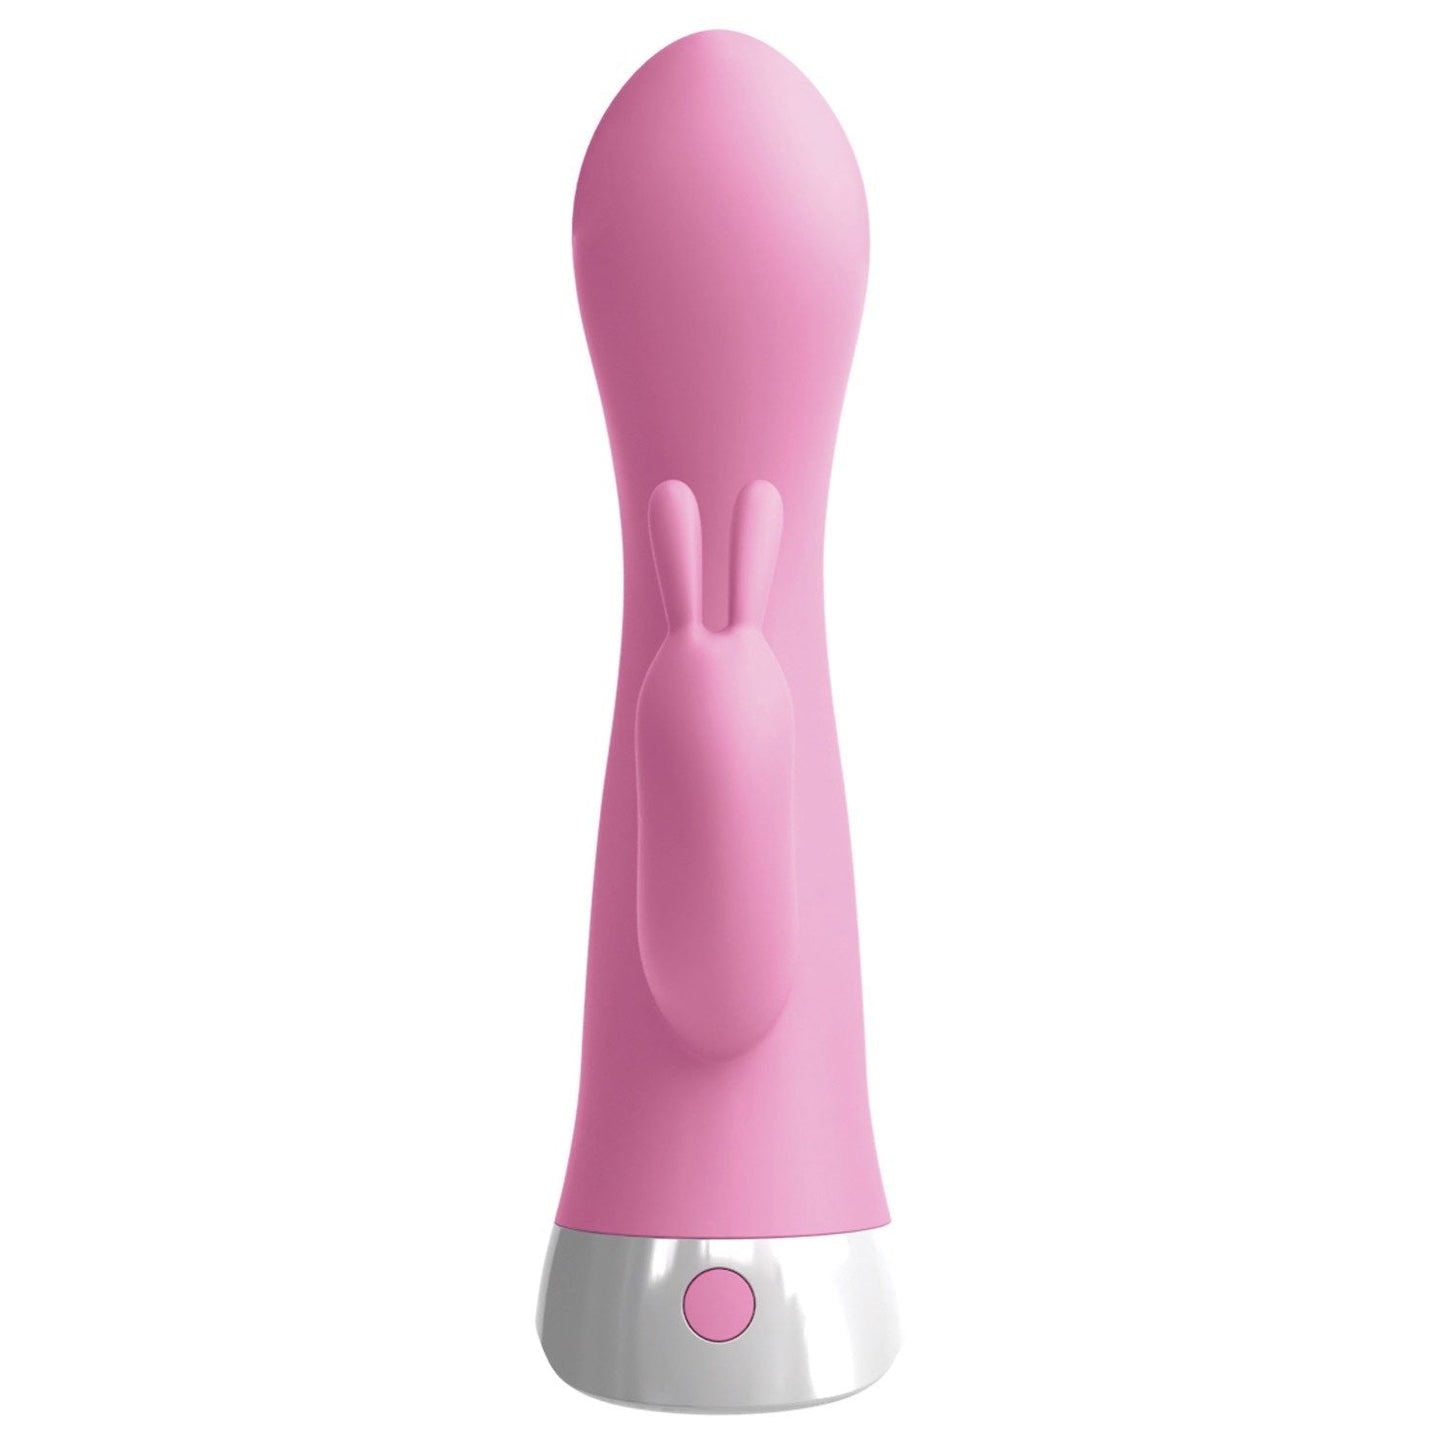 Wall Banger Rabbit - Pink USB Rechargeable Rabbit Vibrator with Wireless Remote